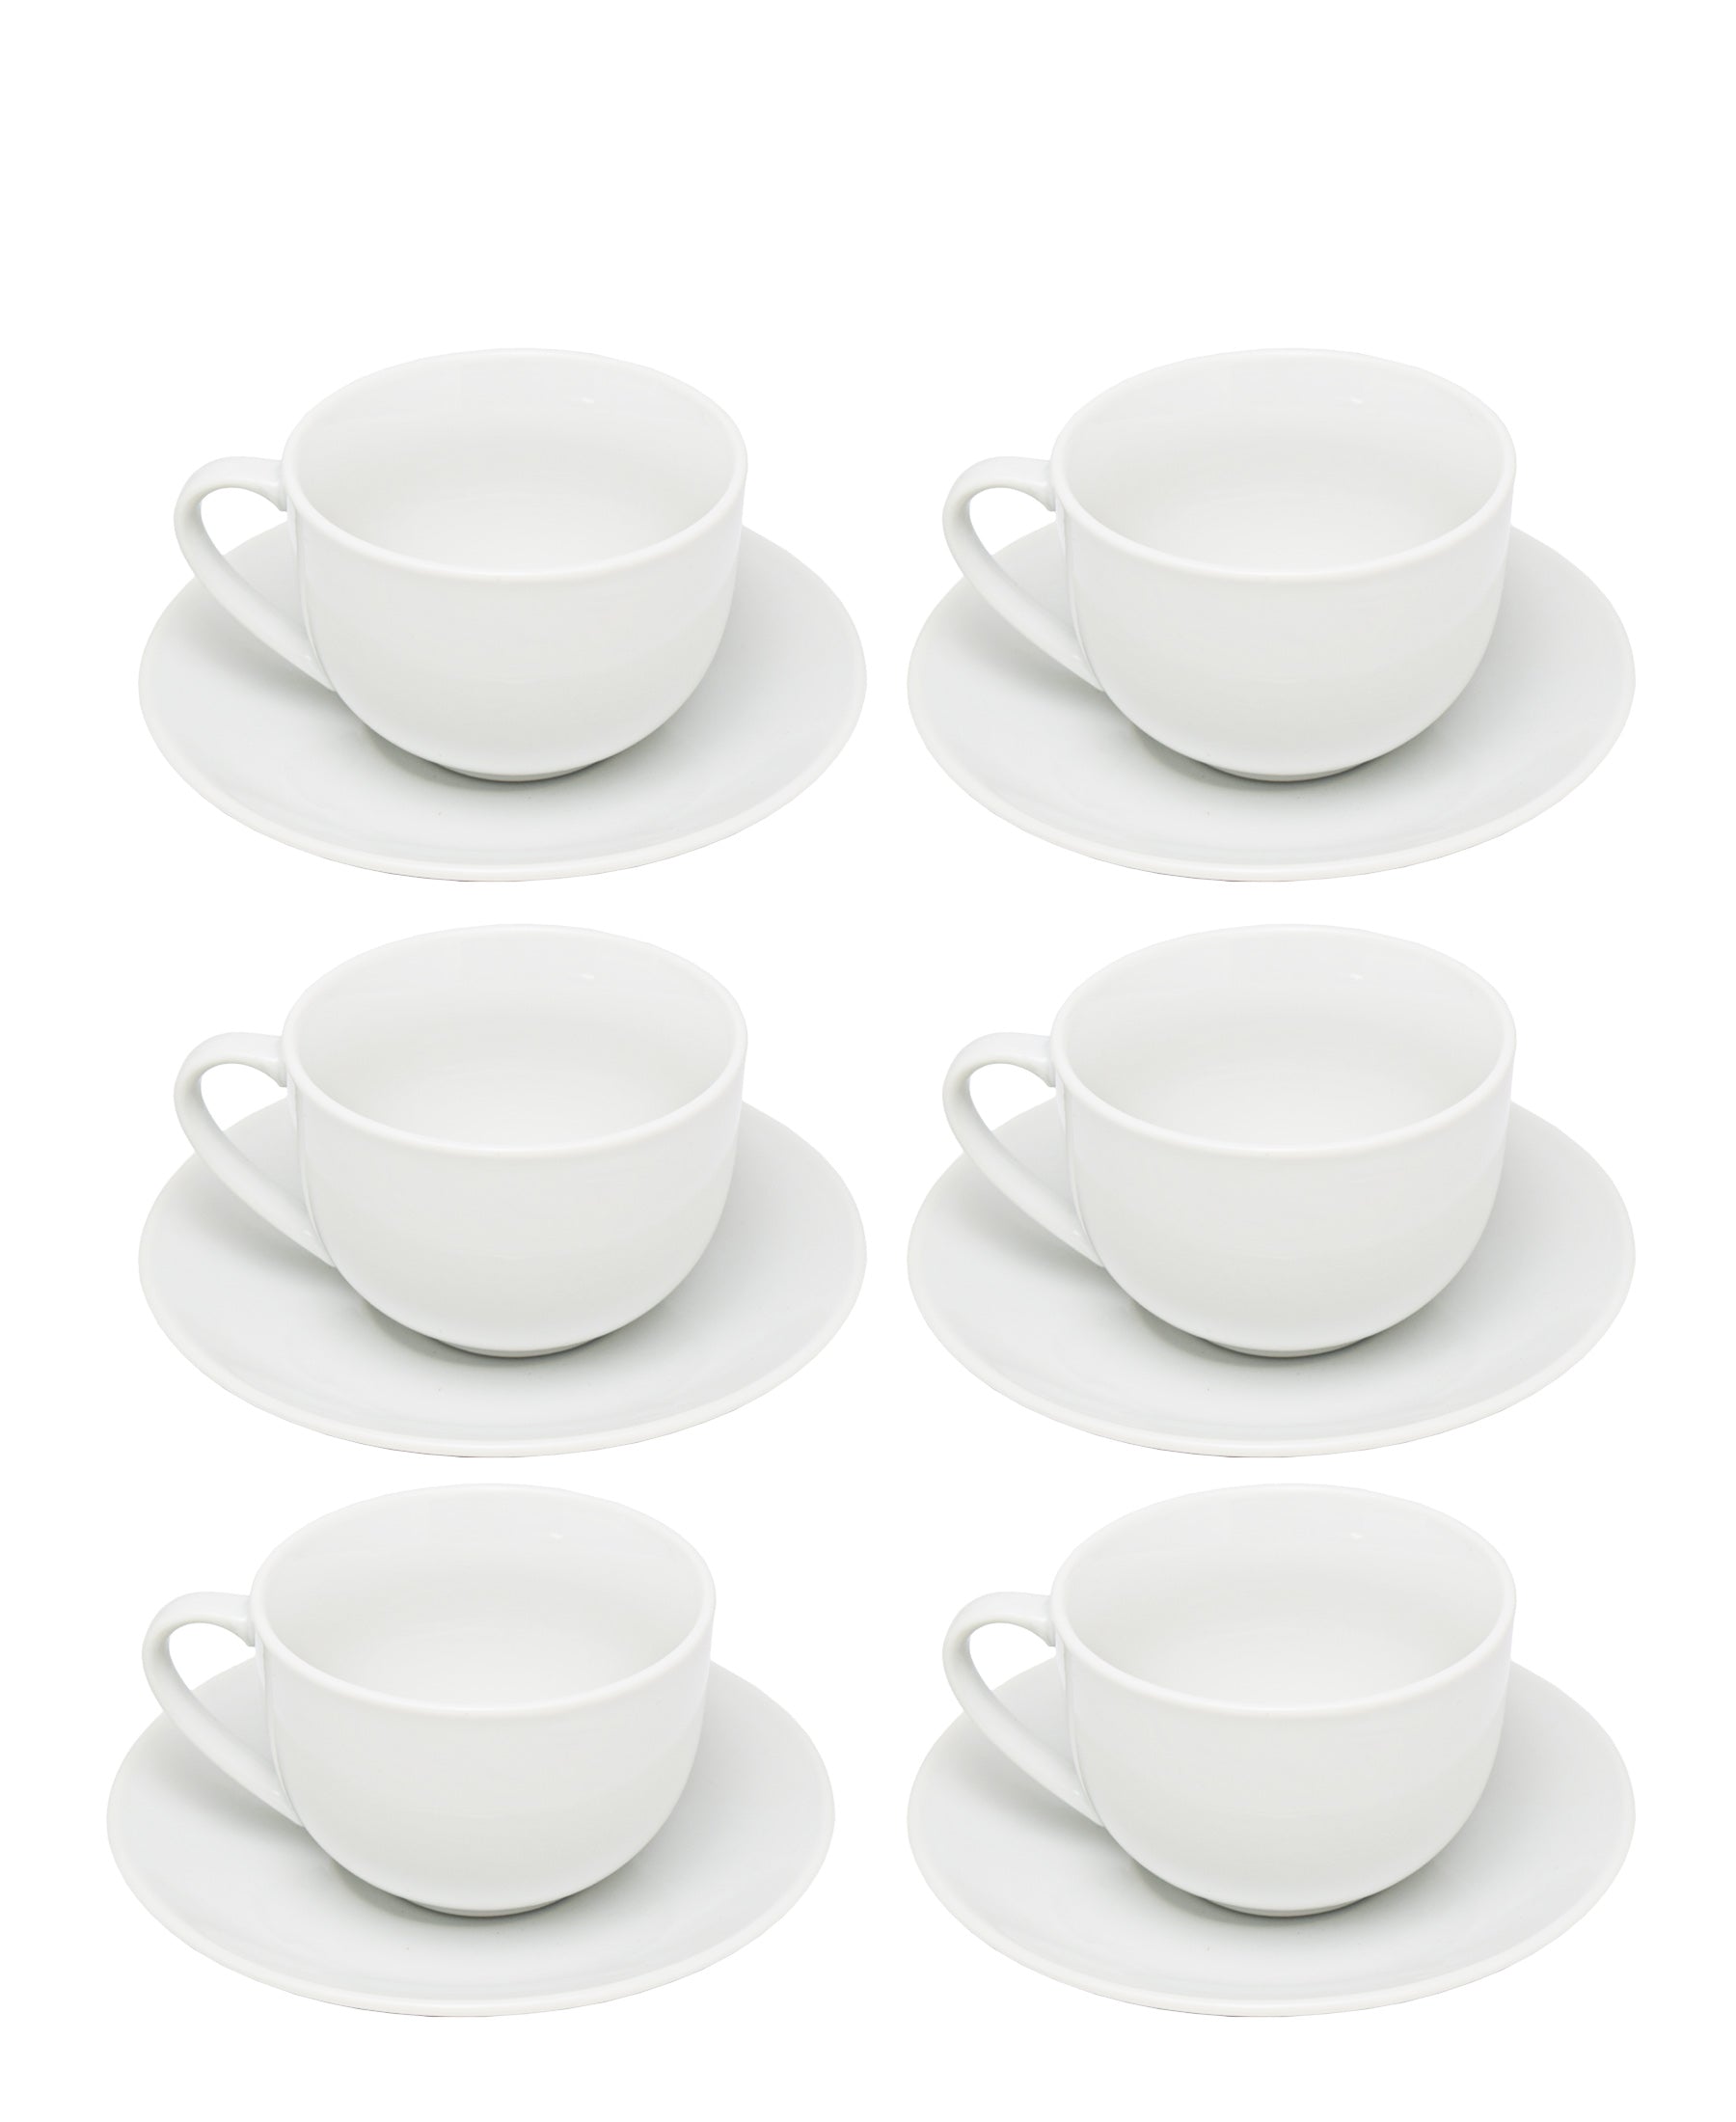 CTH 12 Piece Cup & Saucer Set - White